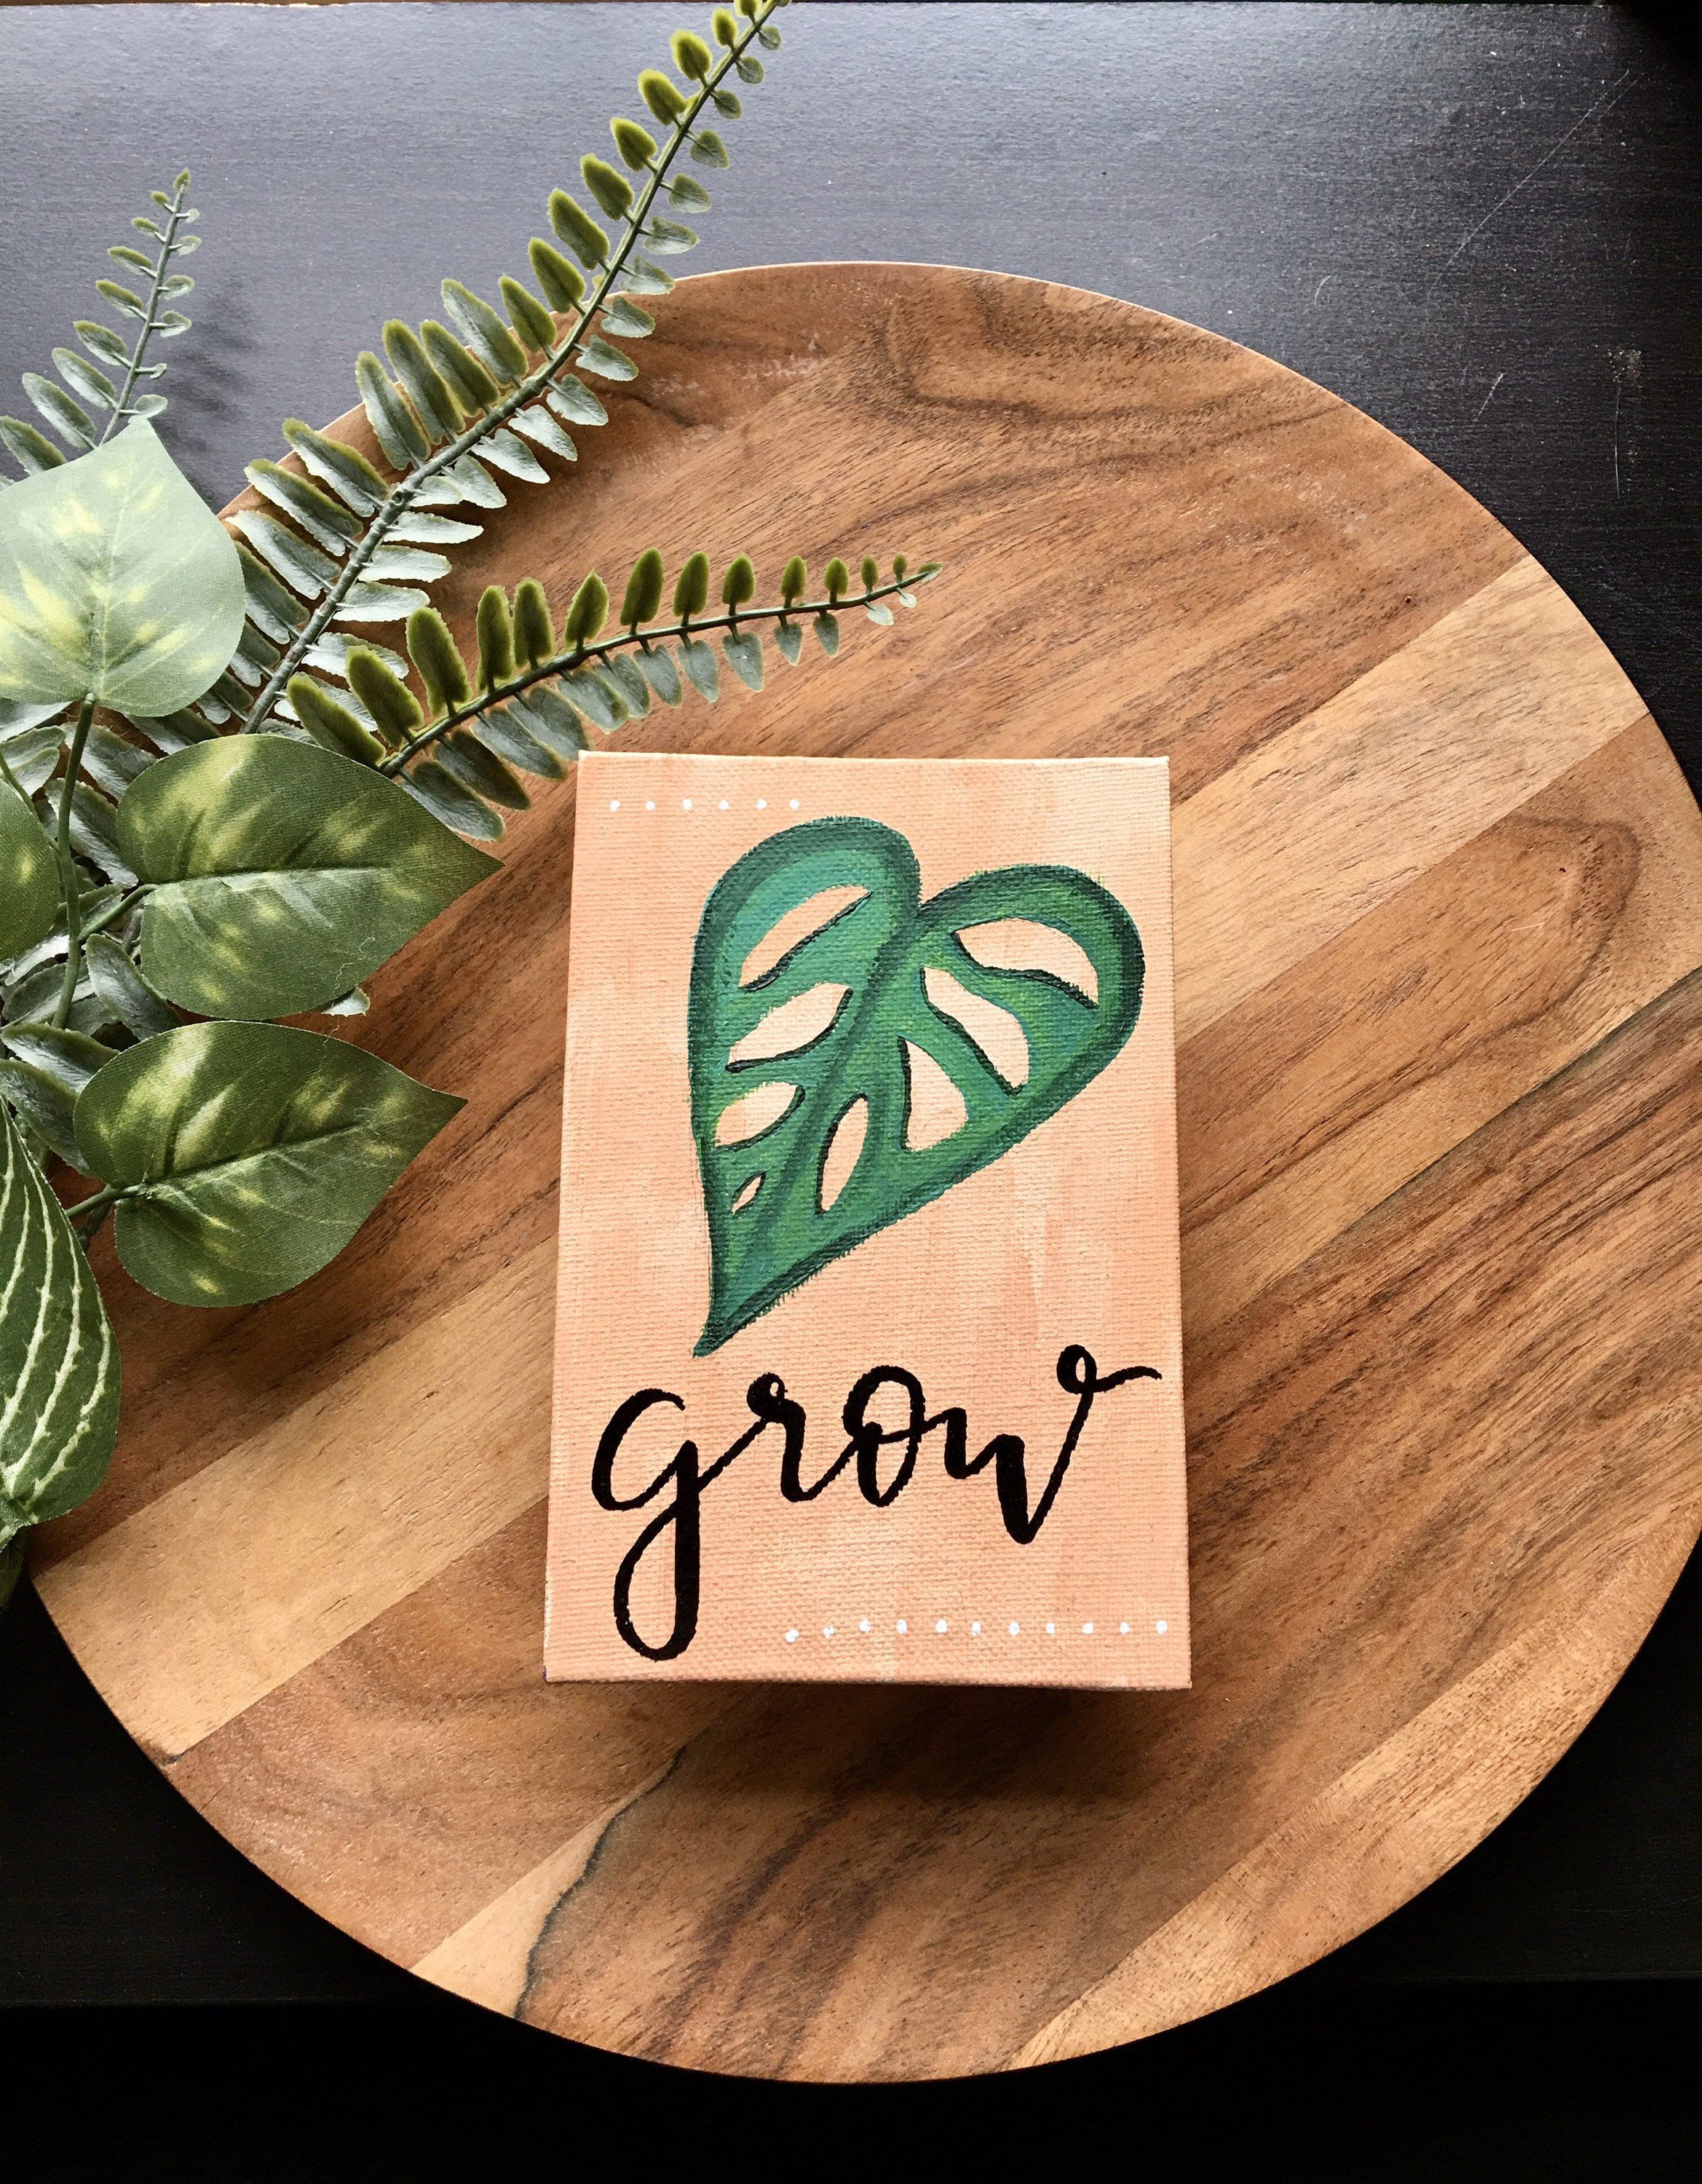 Grow! Monstera Plant Mini Canvas 4x6 Inspirational Quote Painting | Nature Inspired Canvas | Handpainted Plant Art | Thinking of You Gift -   14 monstera plants Quotes ideas